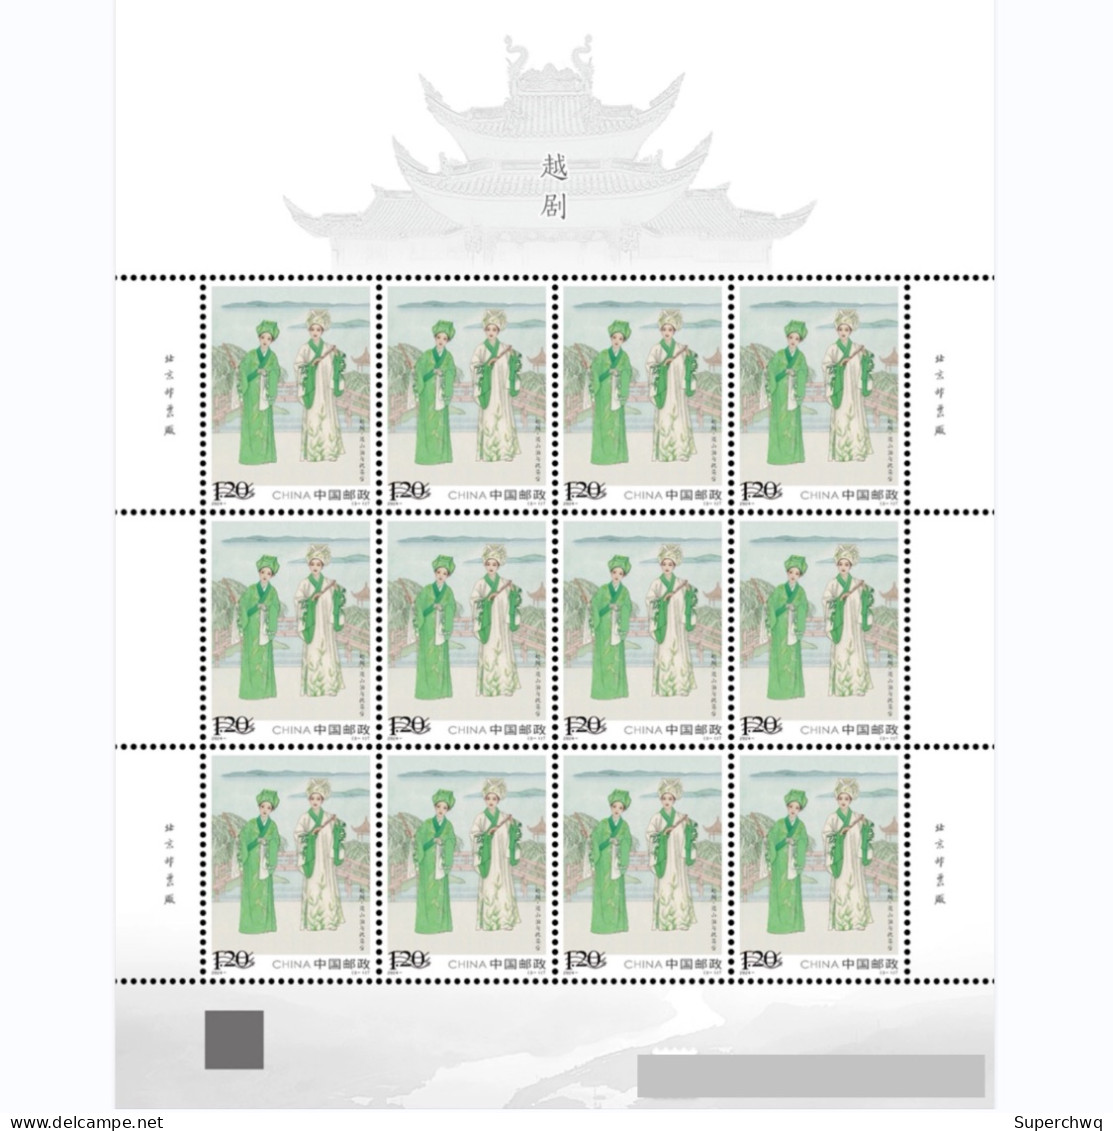 China stamp MS MNH 2024-8 "Yue Opera" Stamp Edition With Same Number Issued By China Post，Pre Sale, Issued On May 20, 20 - Unused Stamps